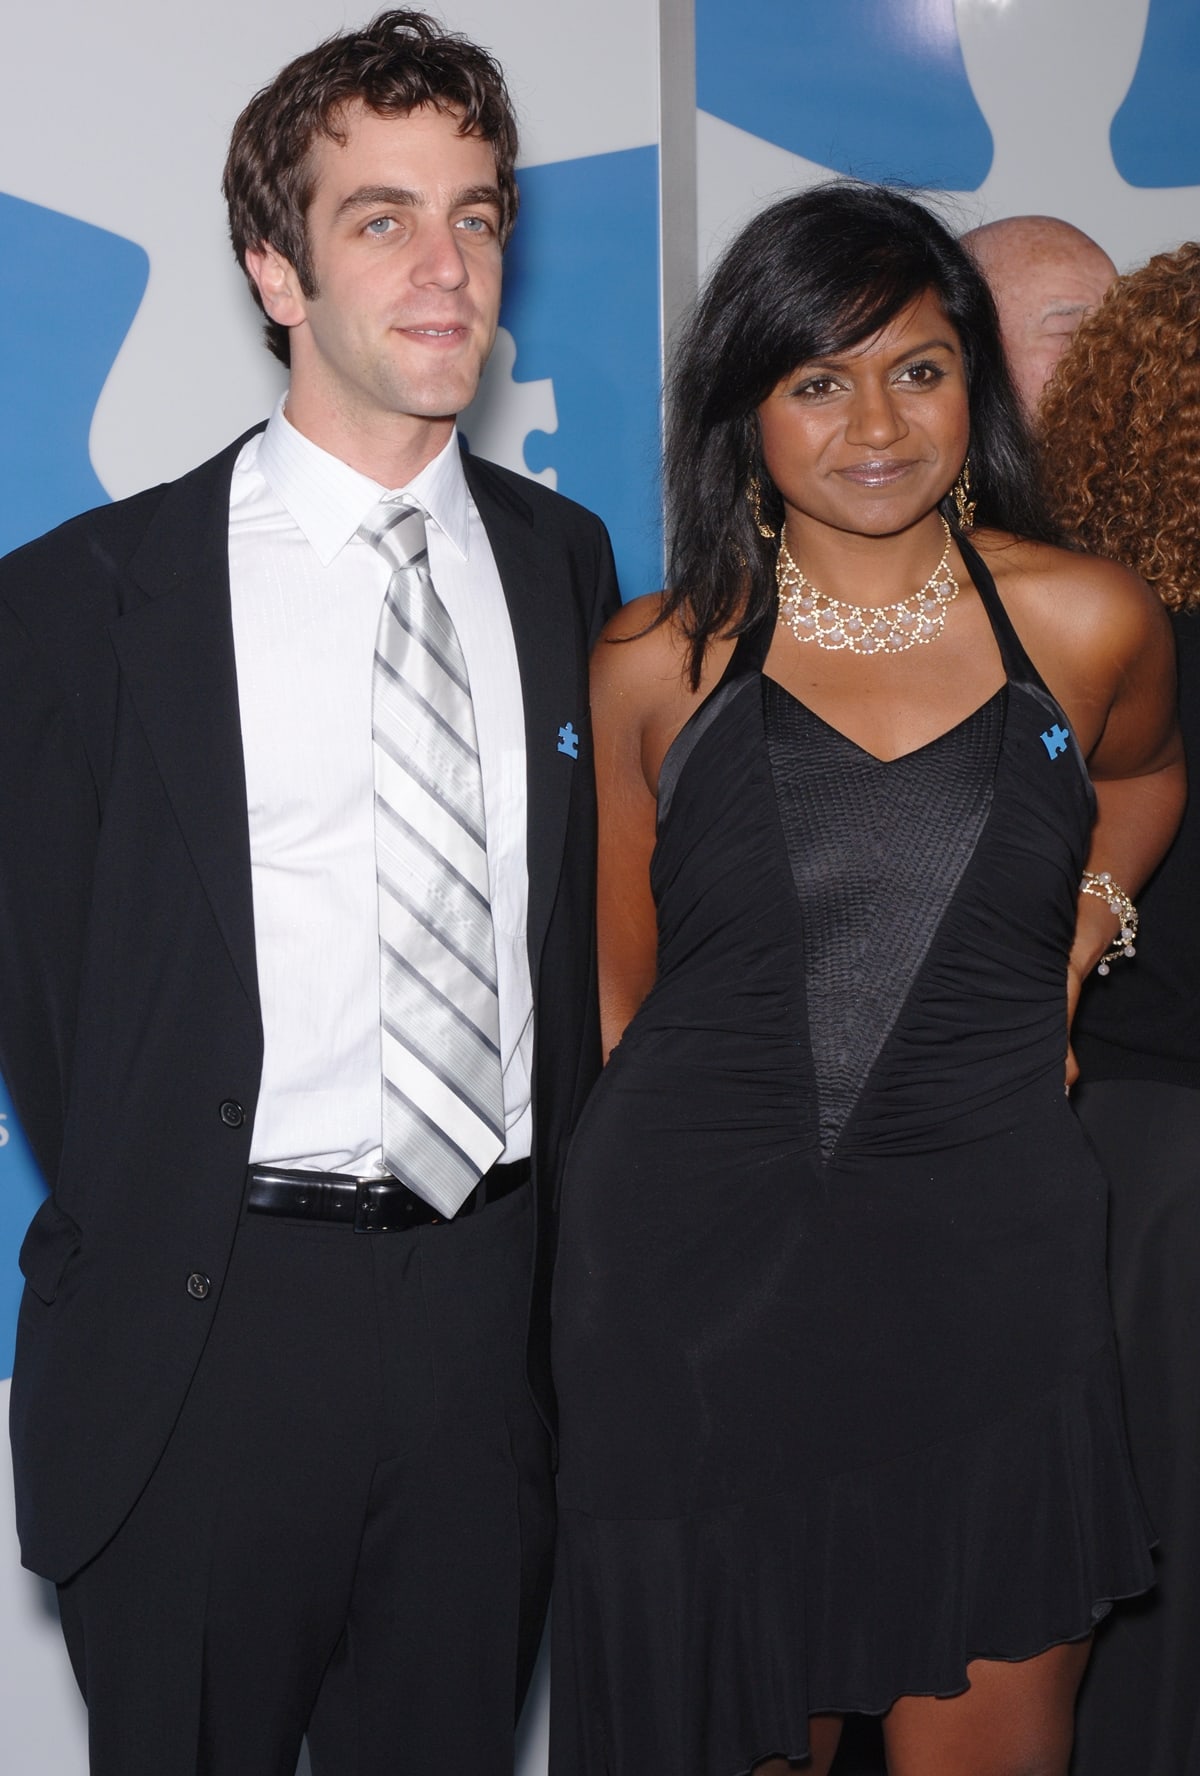 B. J. Novak and Mindy Kaling have remained close friends although they're no longer dating